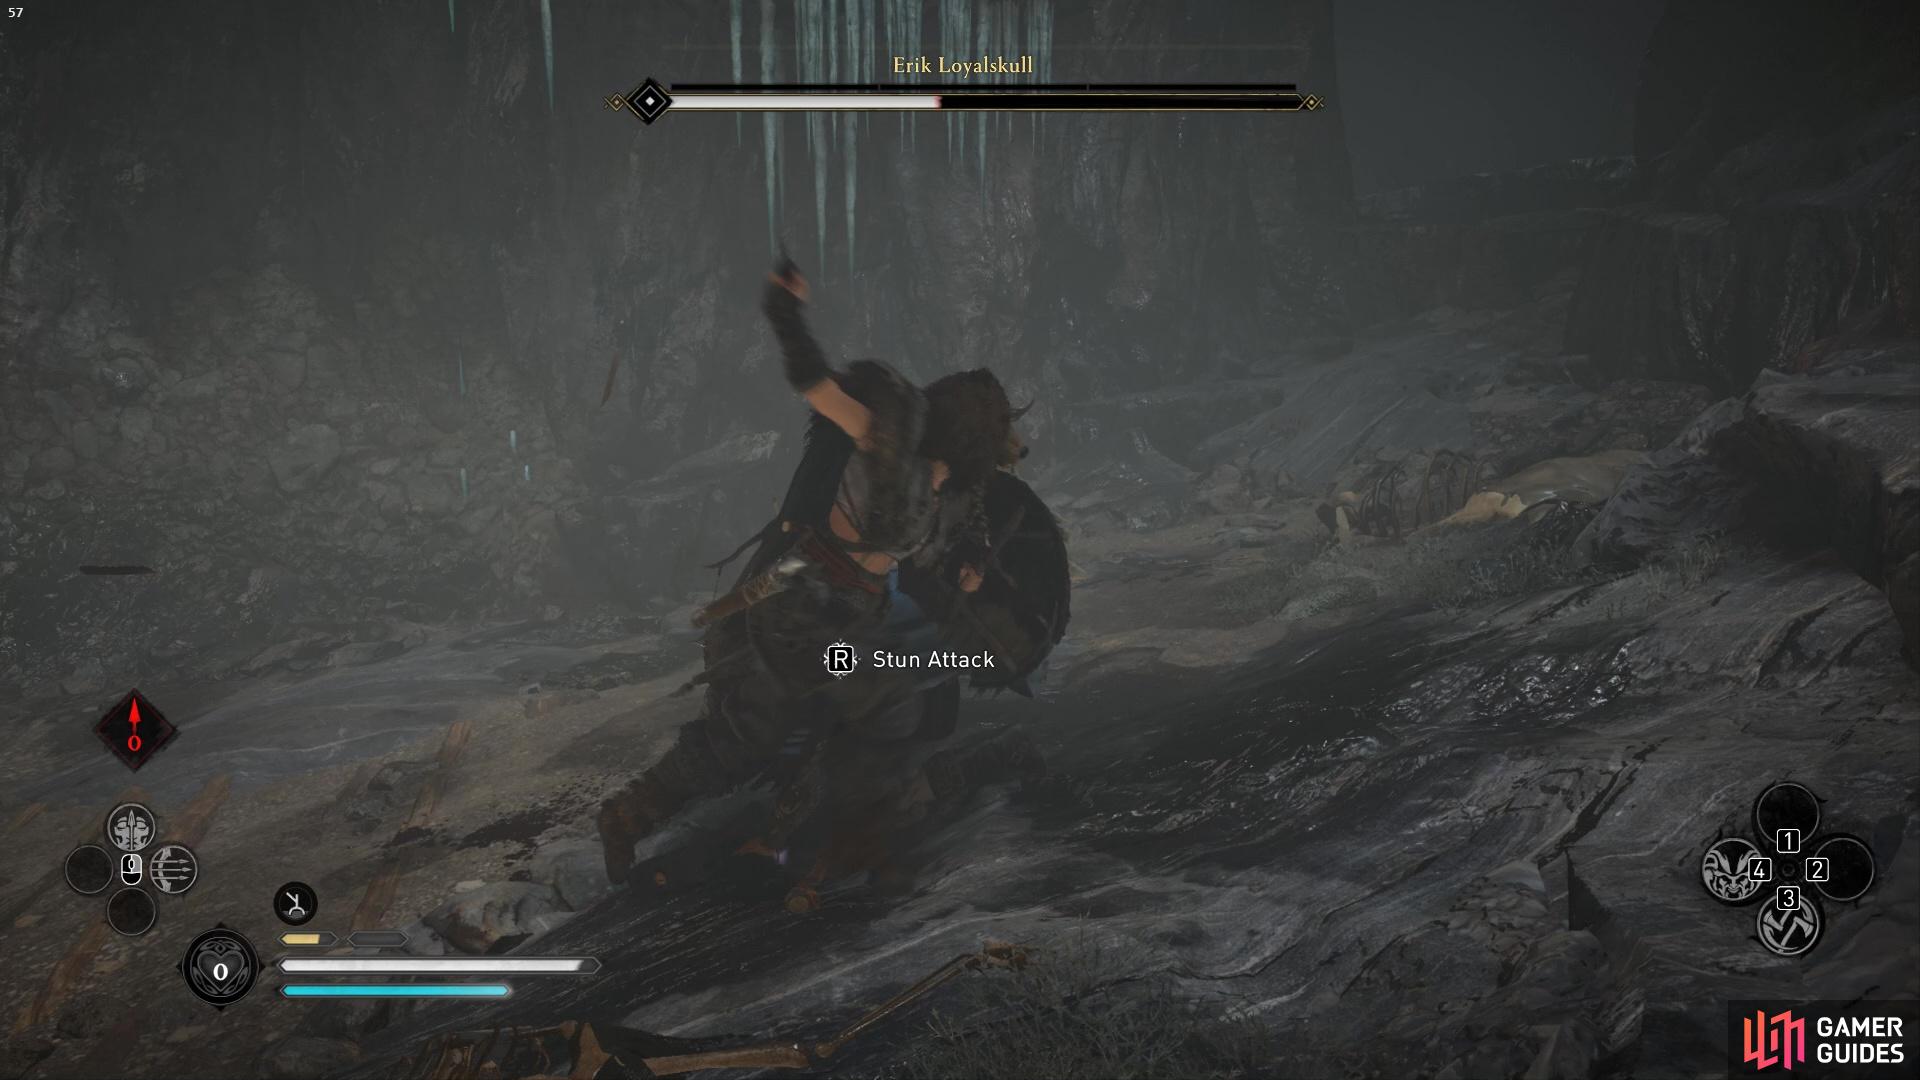 Parrying and shooting his weak points will drain his stamina and you'll be able to stun attack him.